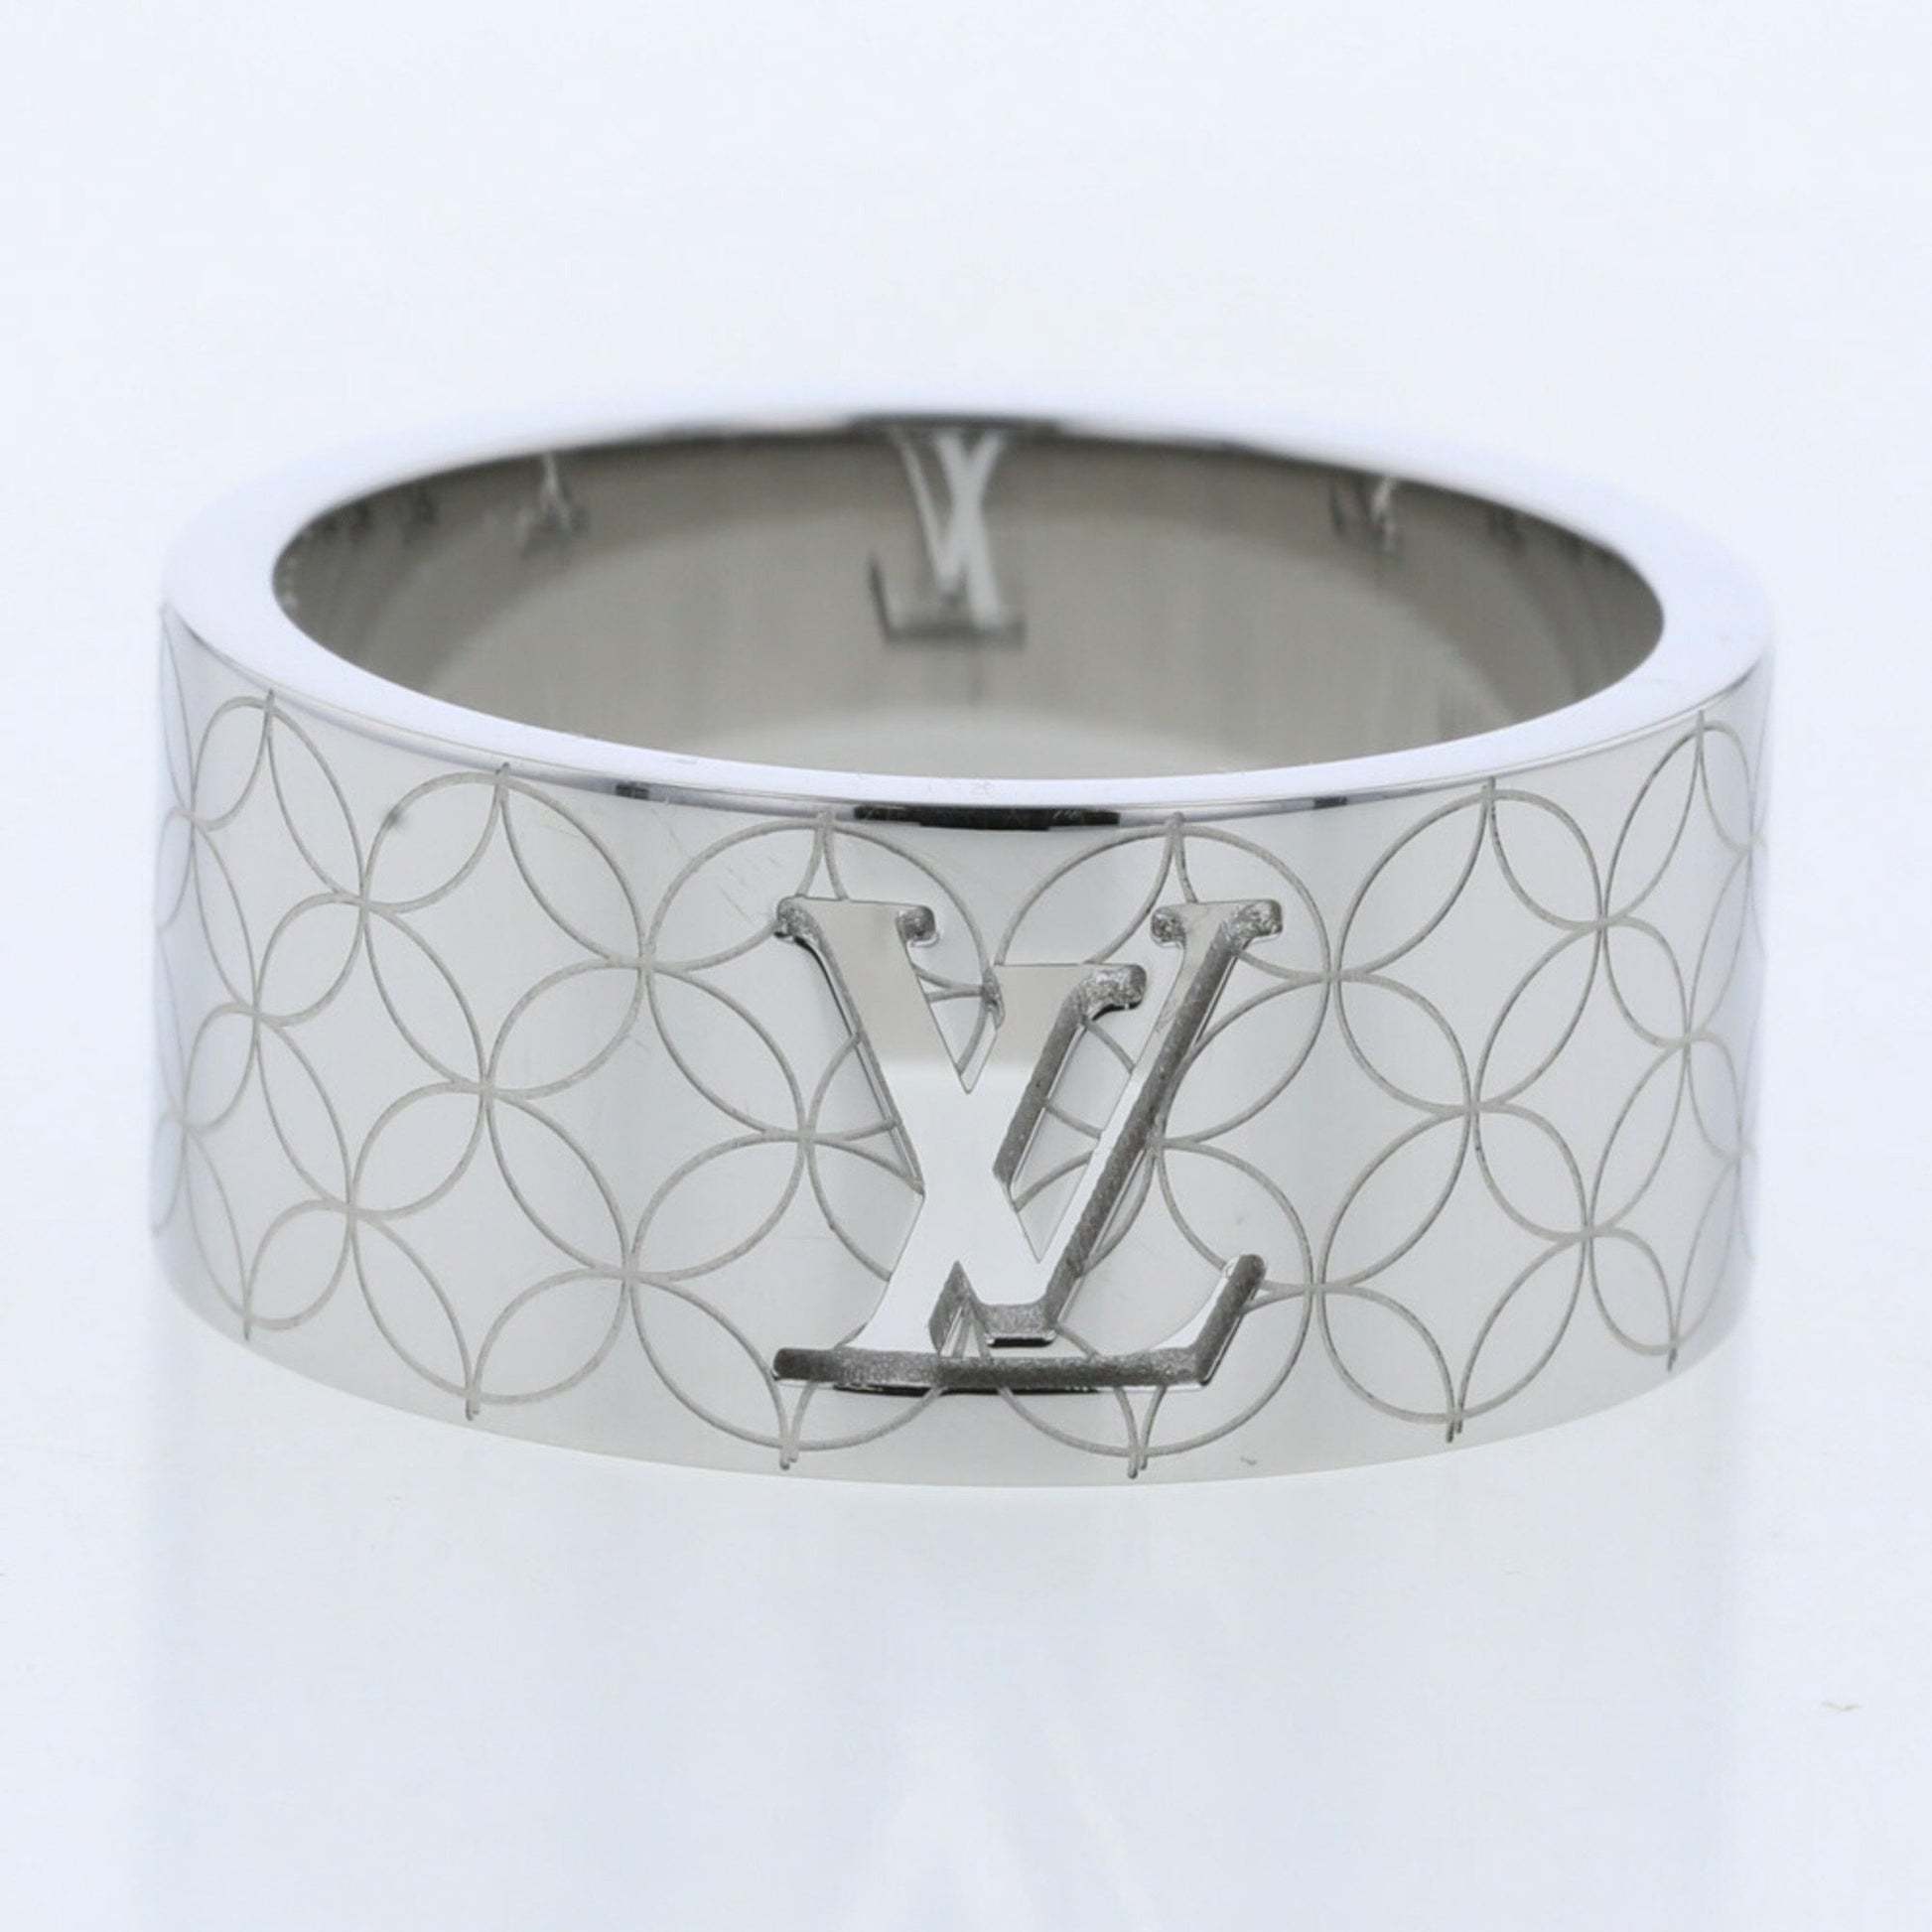 Louis Vuitton Ring Berg Champs Elysees M65456 Silver Plated Upper No. 16.5 Lower 18 Men's